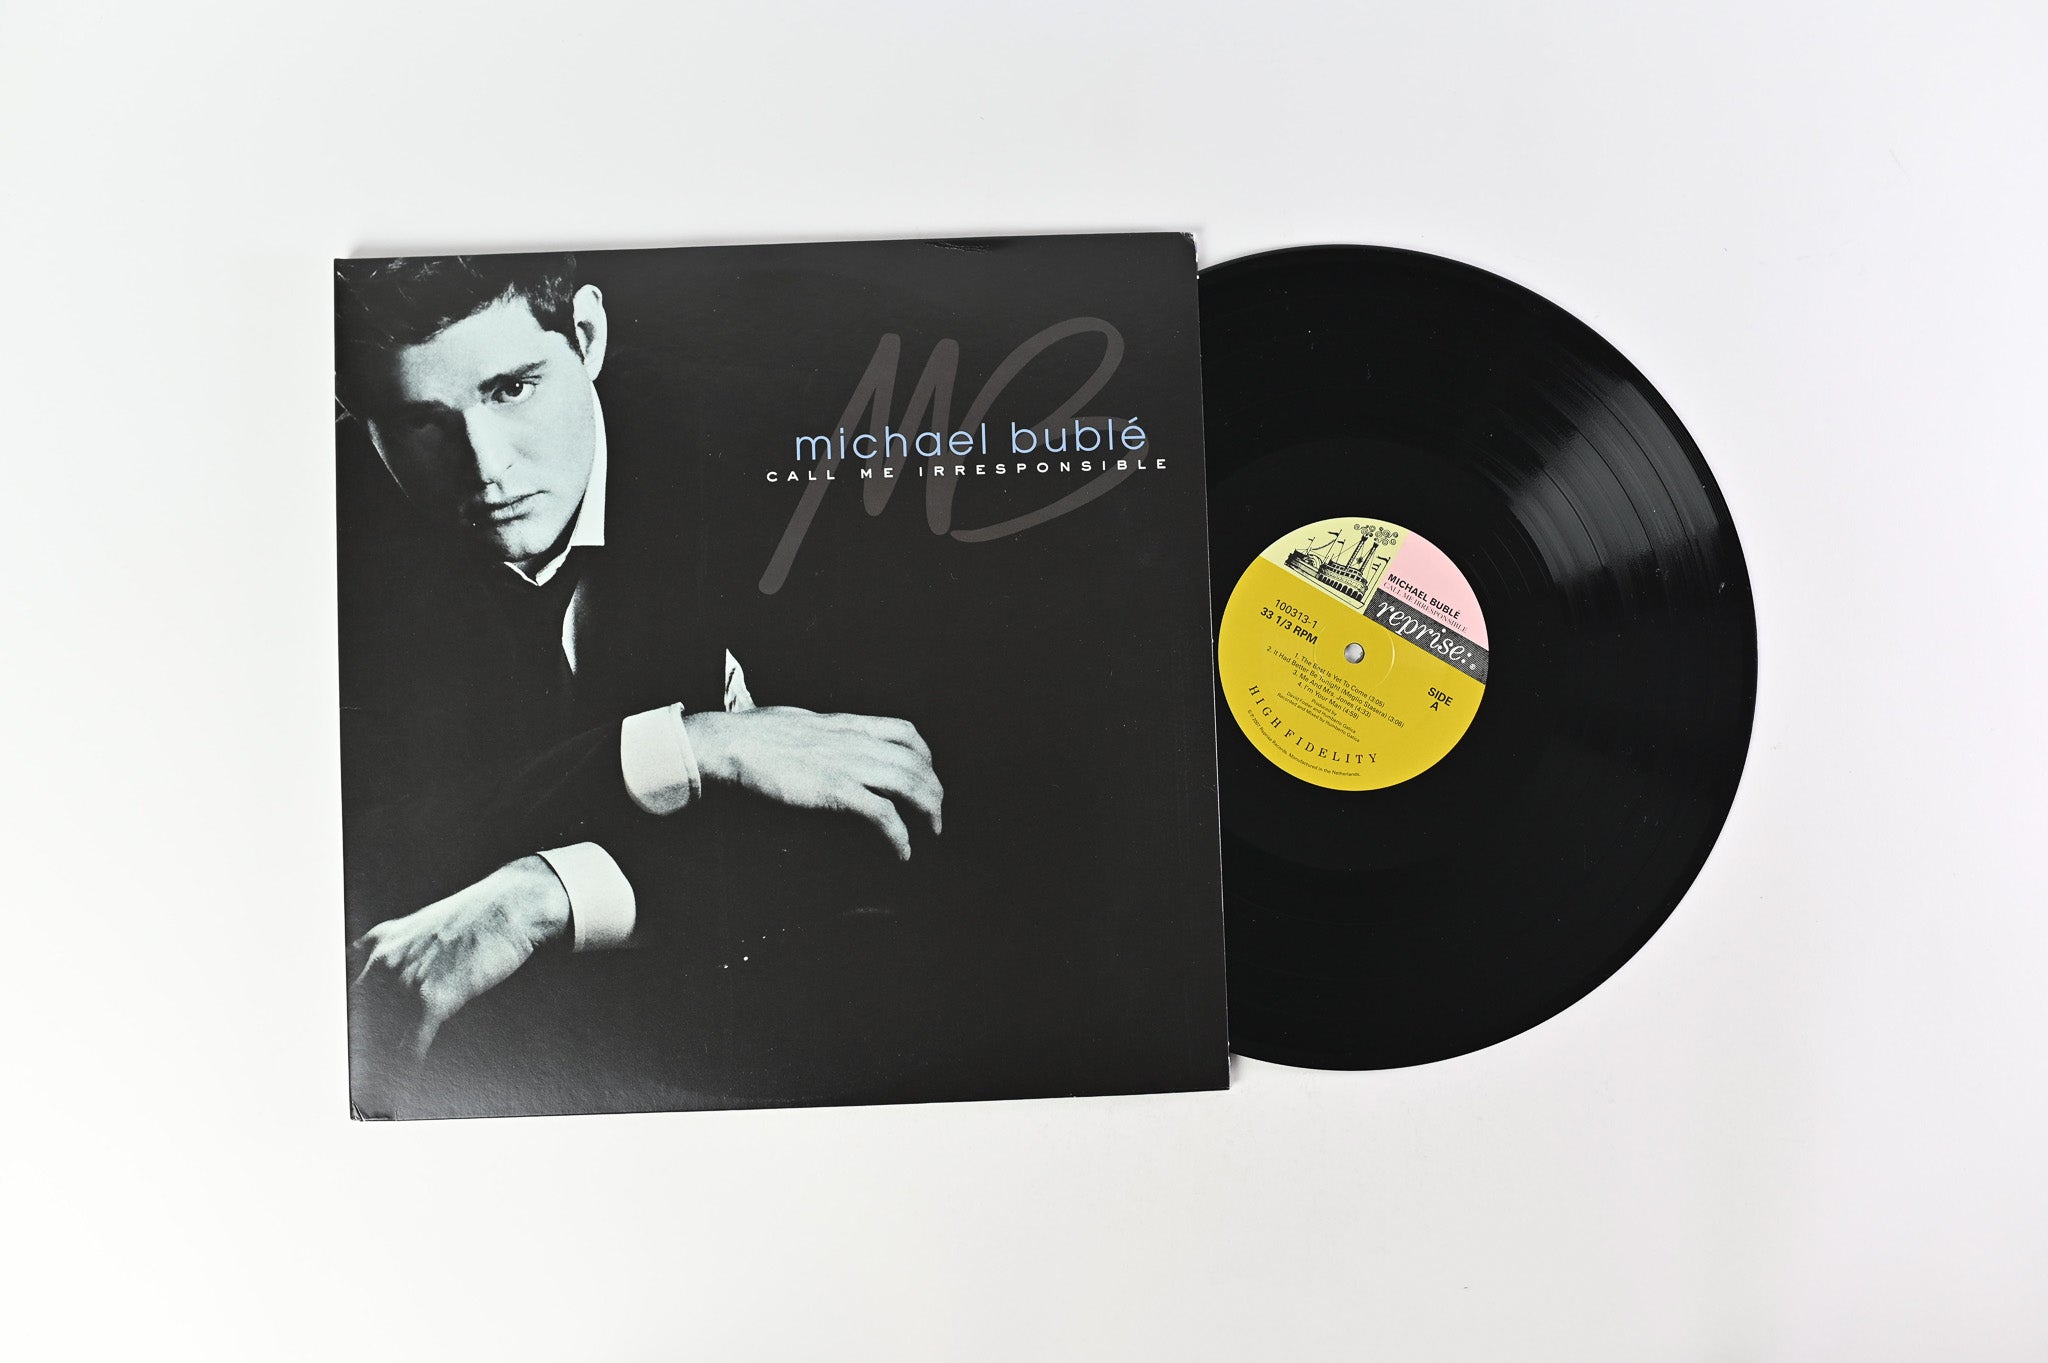 Michael Bublé - Call Me Irresponsible on 143/Reprise Records